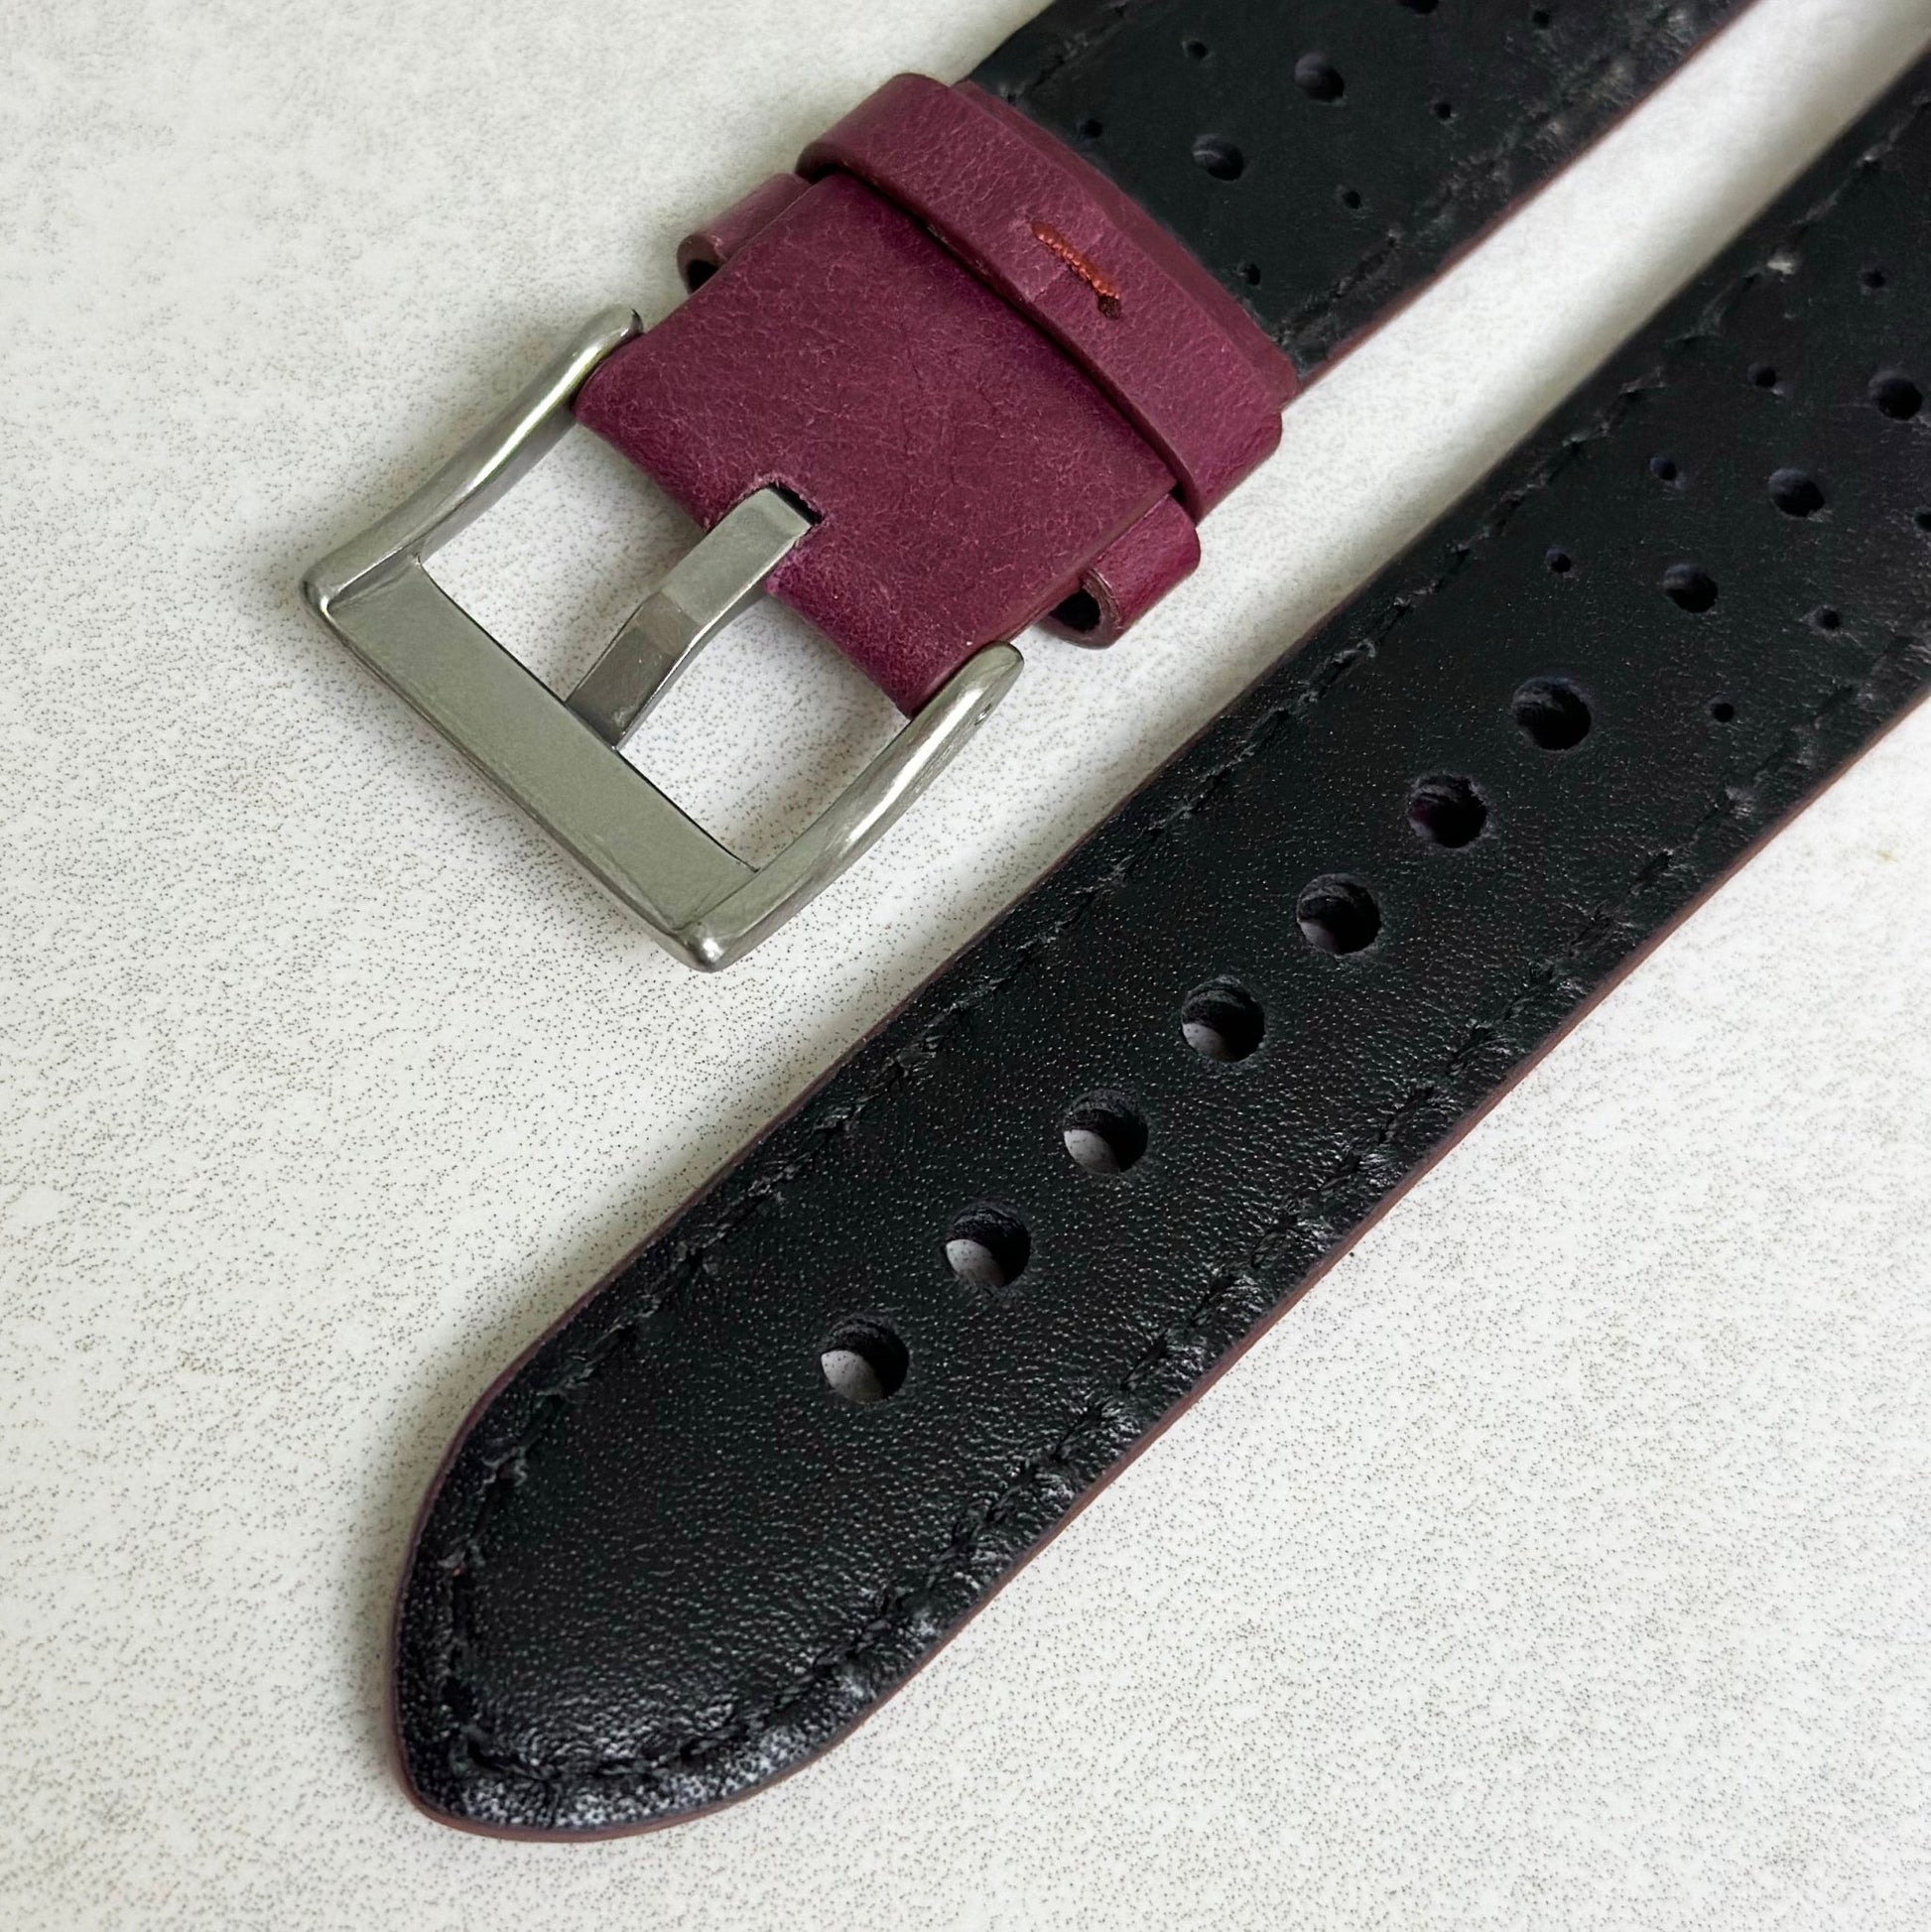 Underside of the brushed 316L stainless steel buckle on the Montecarlo plum purple full grain leather watch strap.